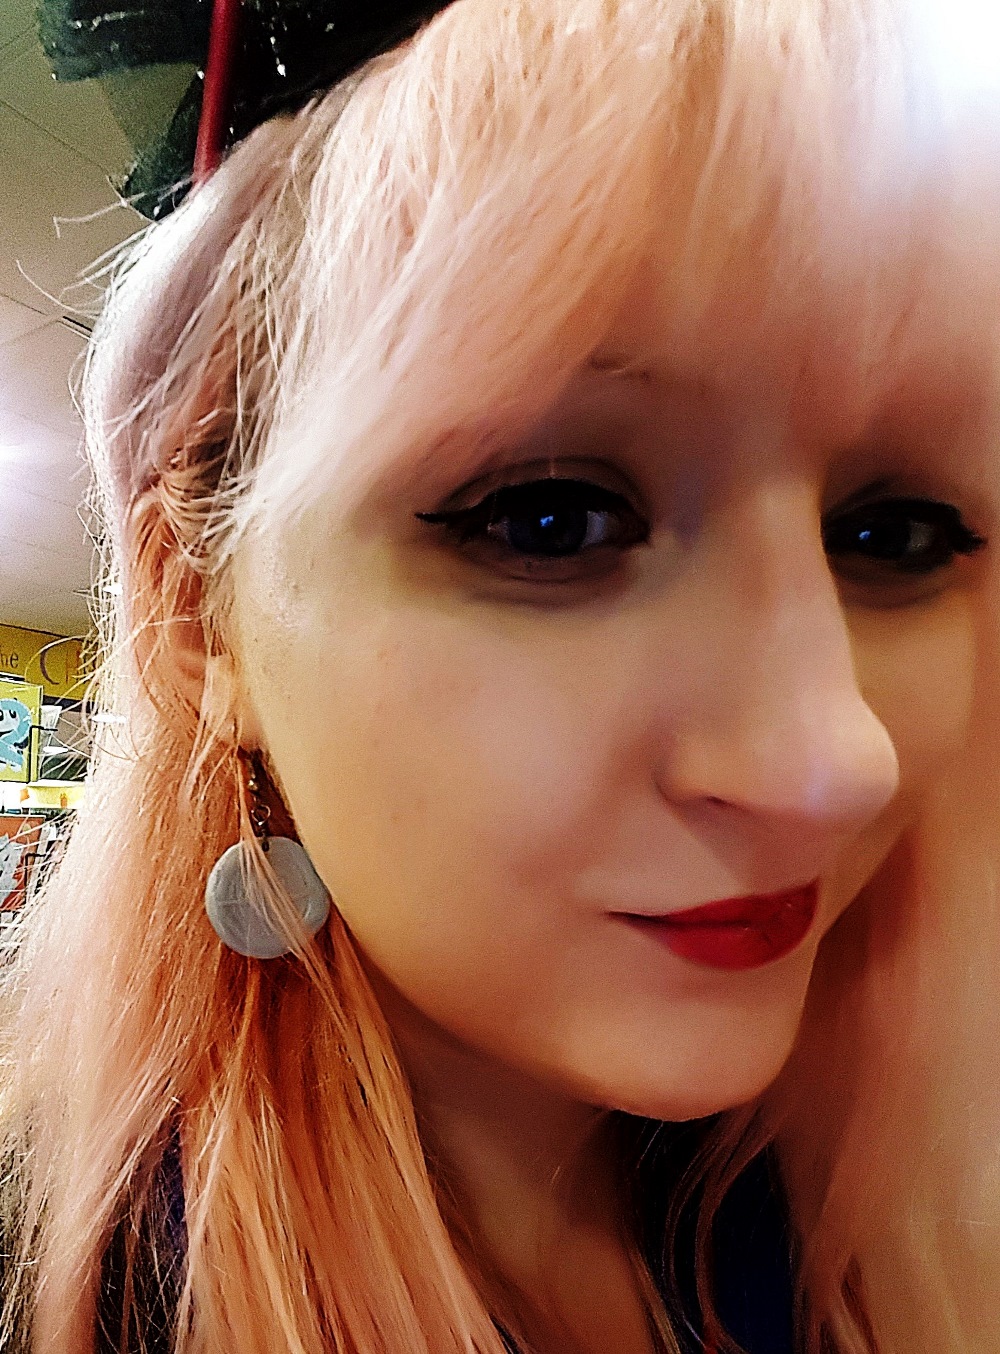 Sickle earrings at the Cursed Child Book Launch at Waterstones Leeds